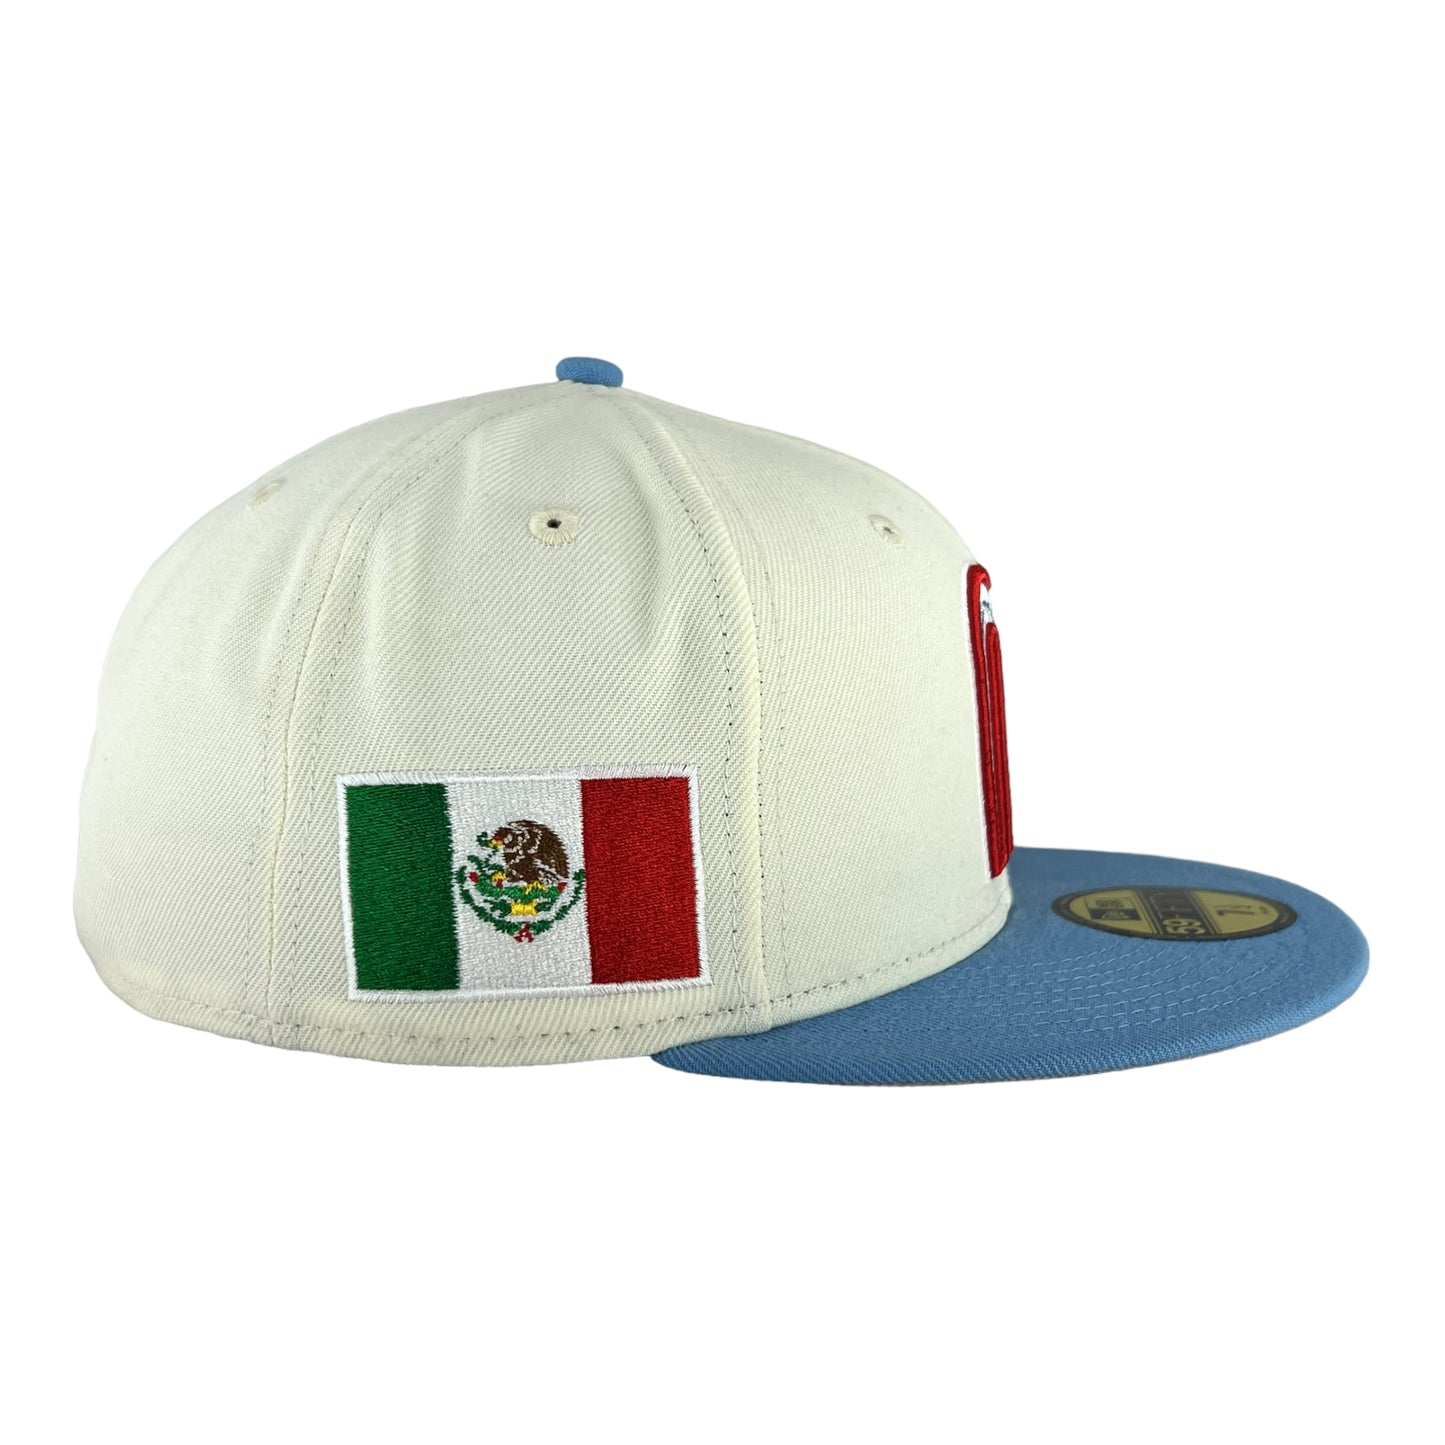 Mexico World Baseball Classic Chrome/Sky New Era 59FIFTY Fitted Hat